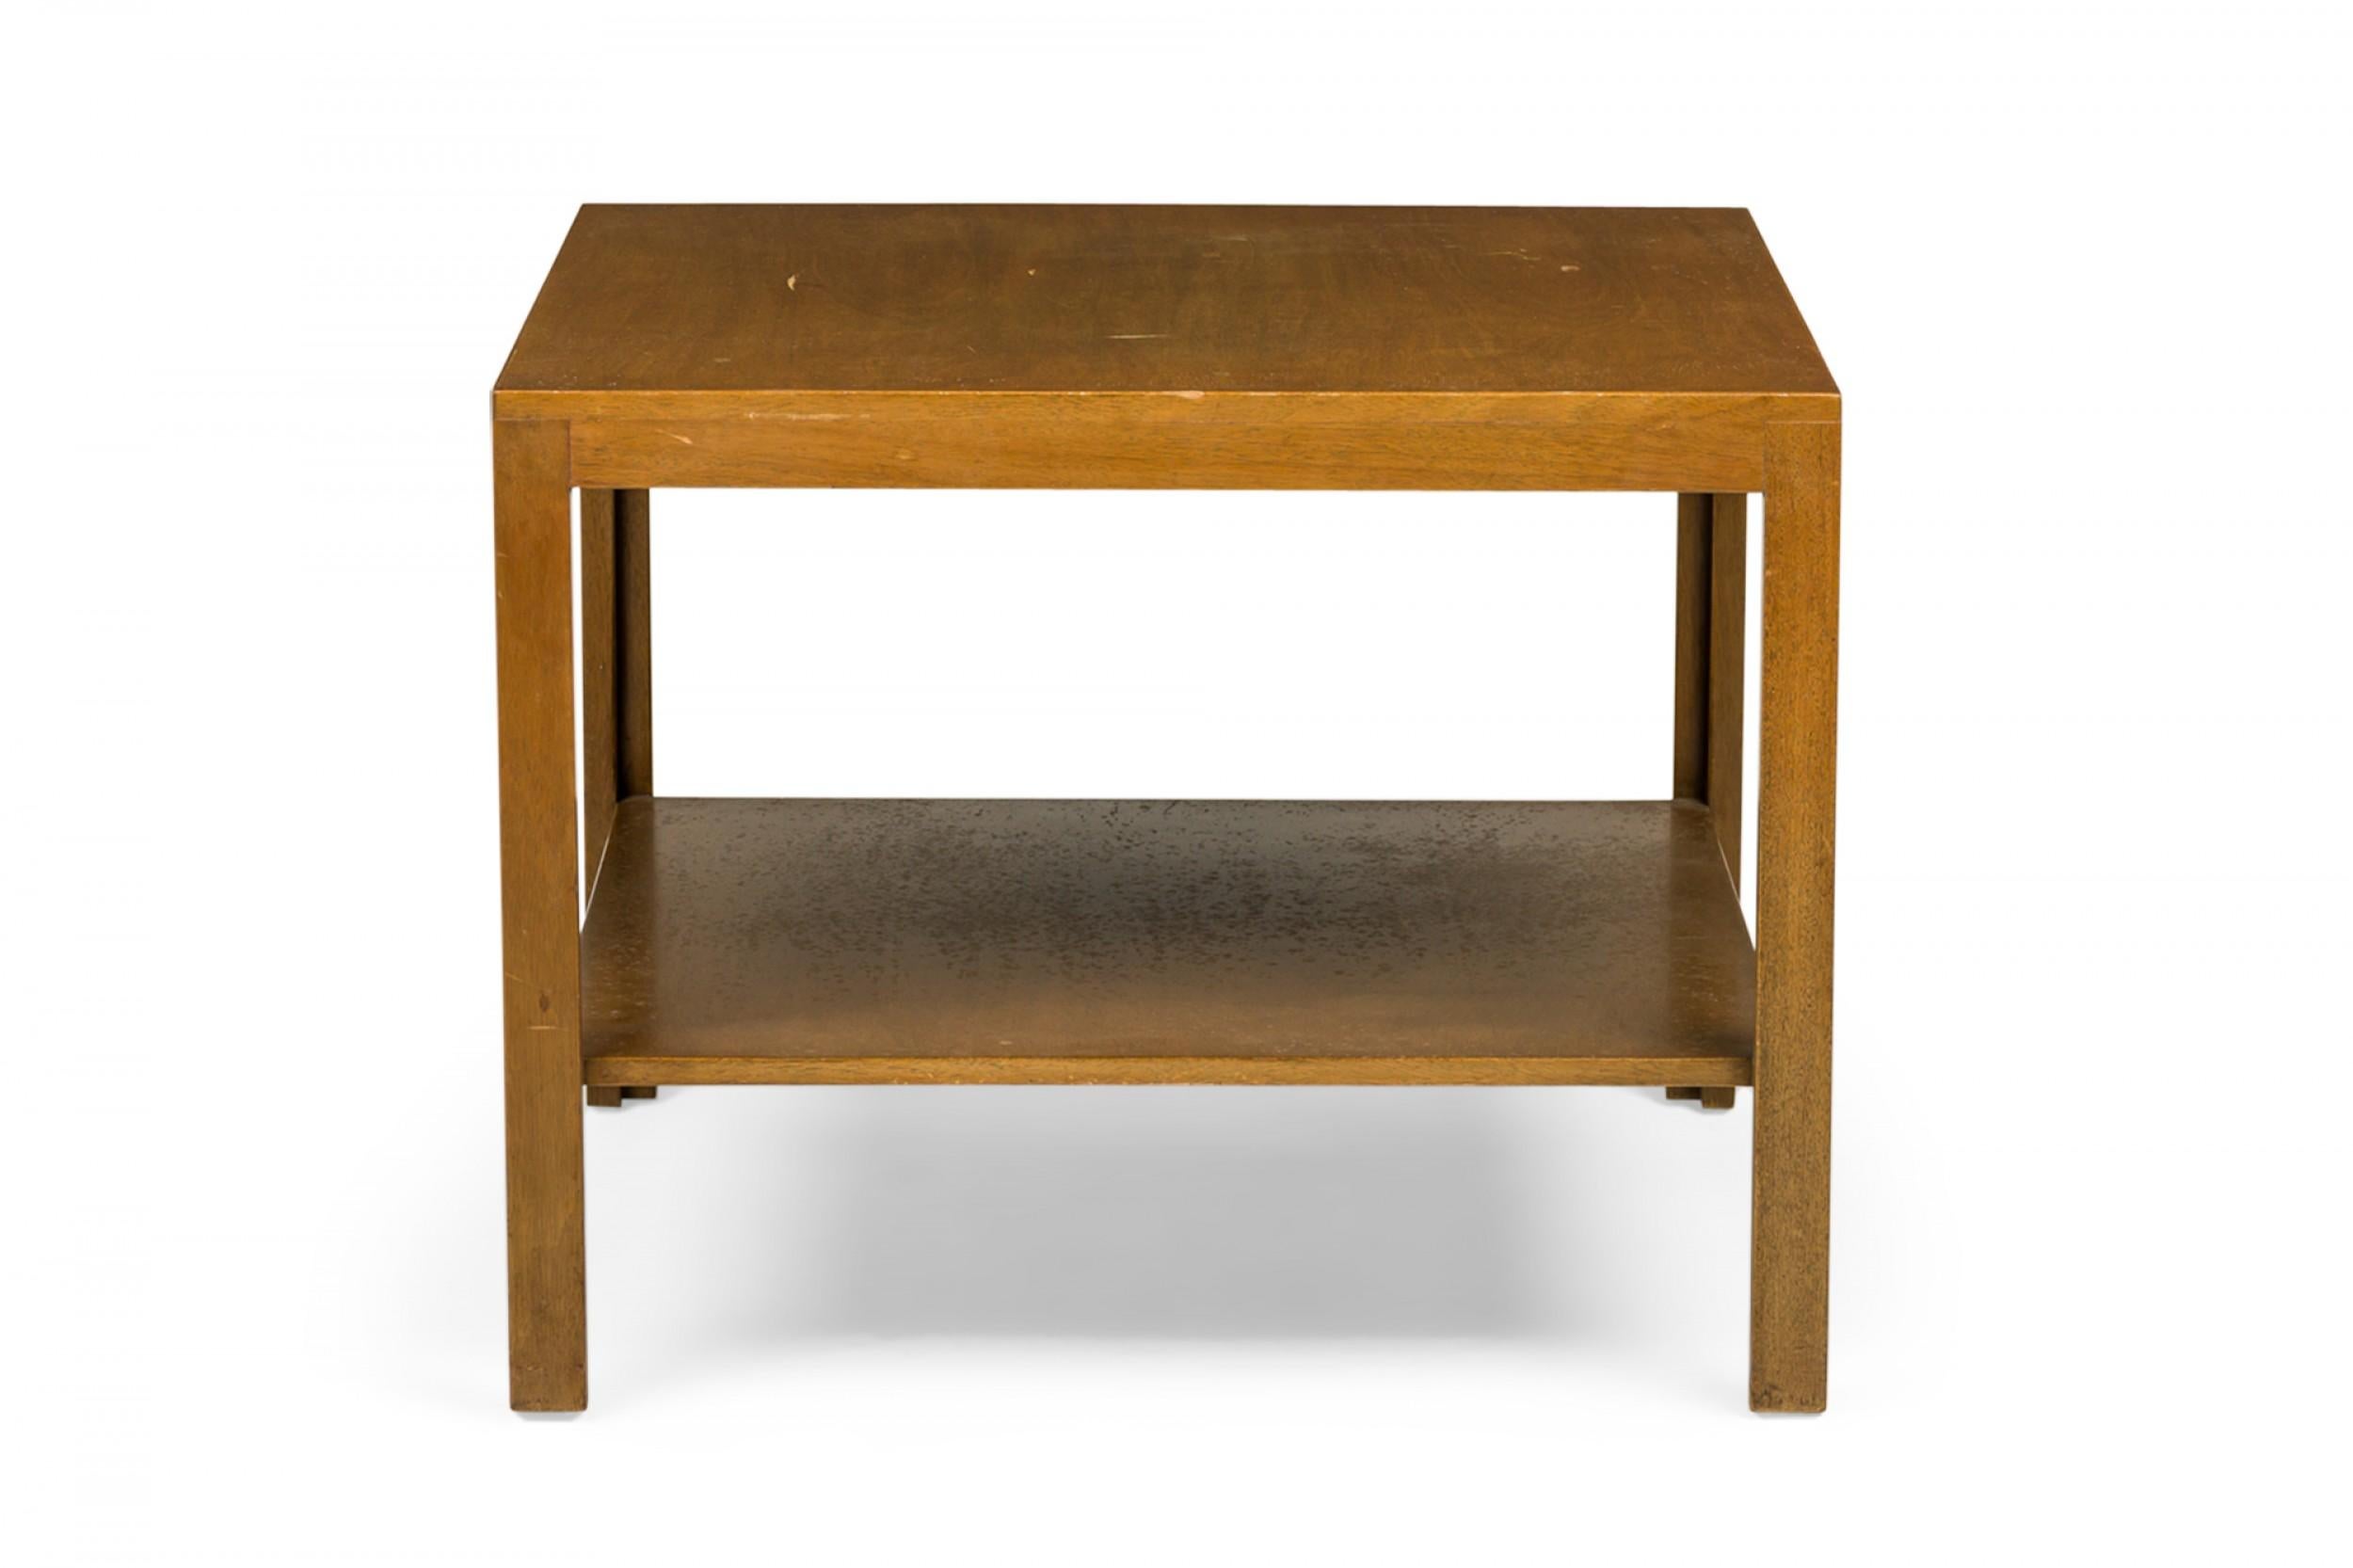 PAIR of American Mid-Century square wooden end / side tables with a lower square stretcher shelf connecting four square legs. (EDWARD WORMLEY FOR DUNBAR FURNITURE COMPANY)(PRICED AS PAIR).